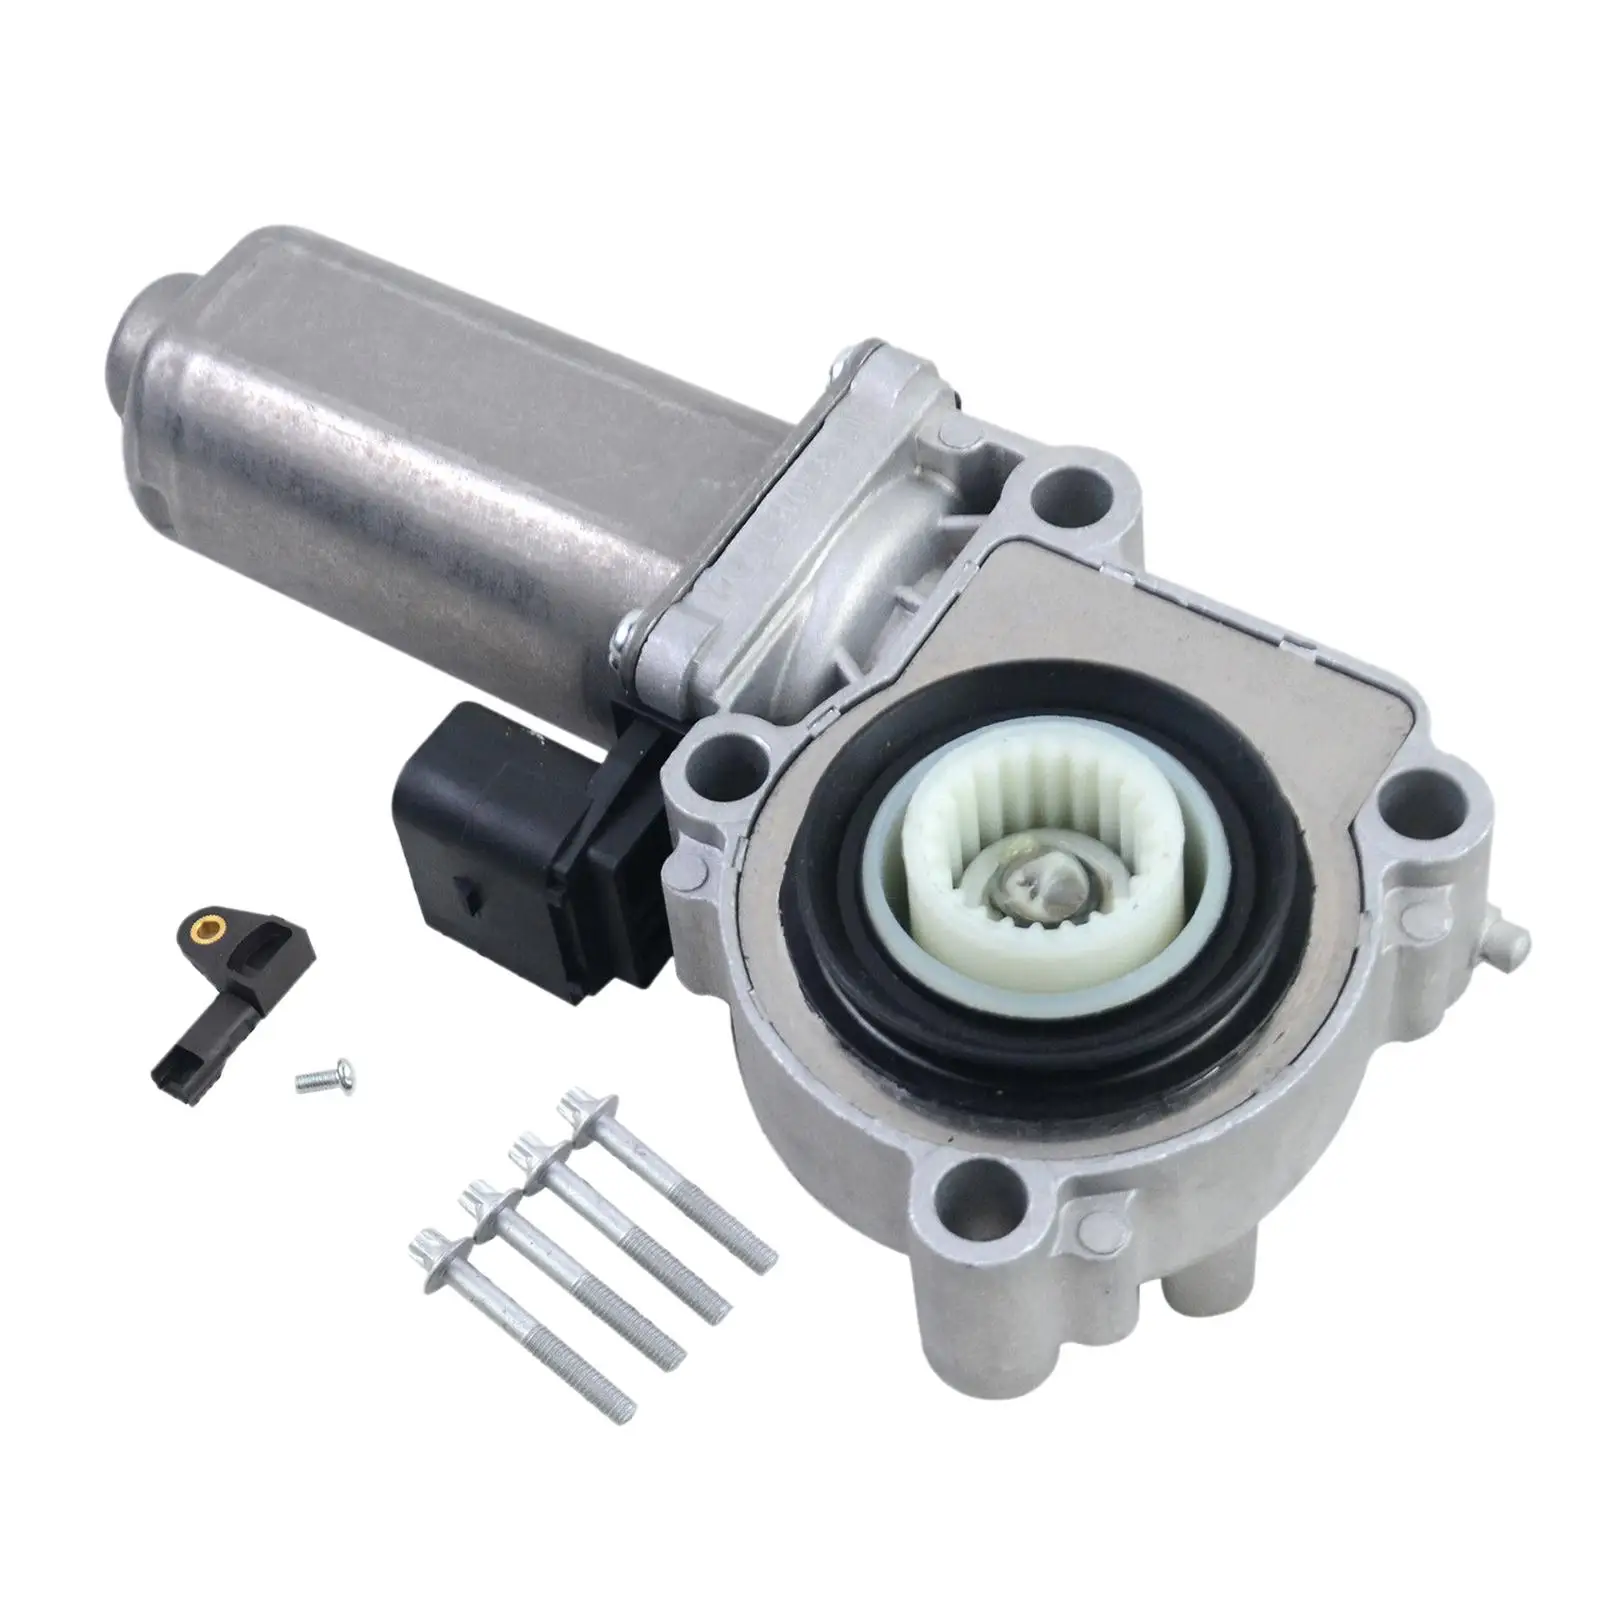 Transfer Case Actuator Shift Motor 27103455137 27103455135 27107555297 for BMW x3 x5